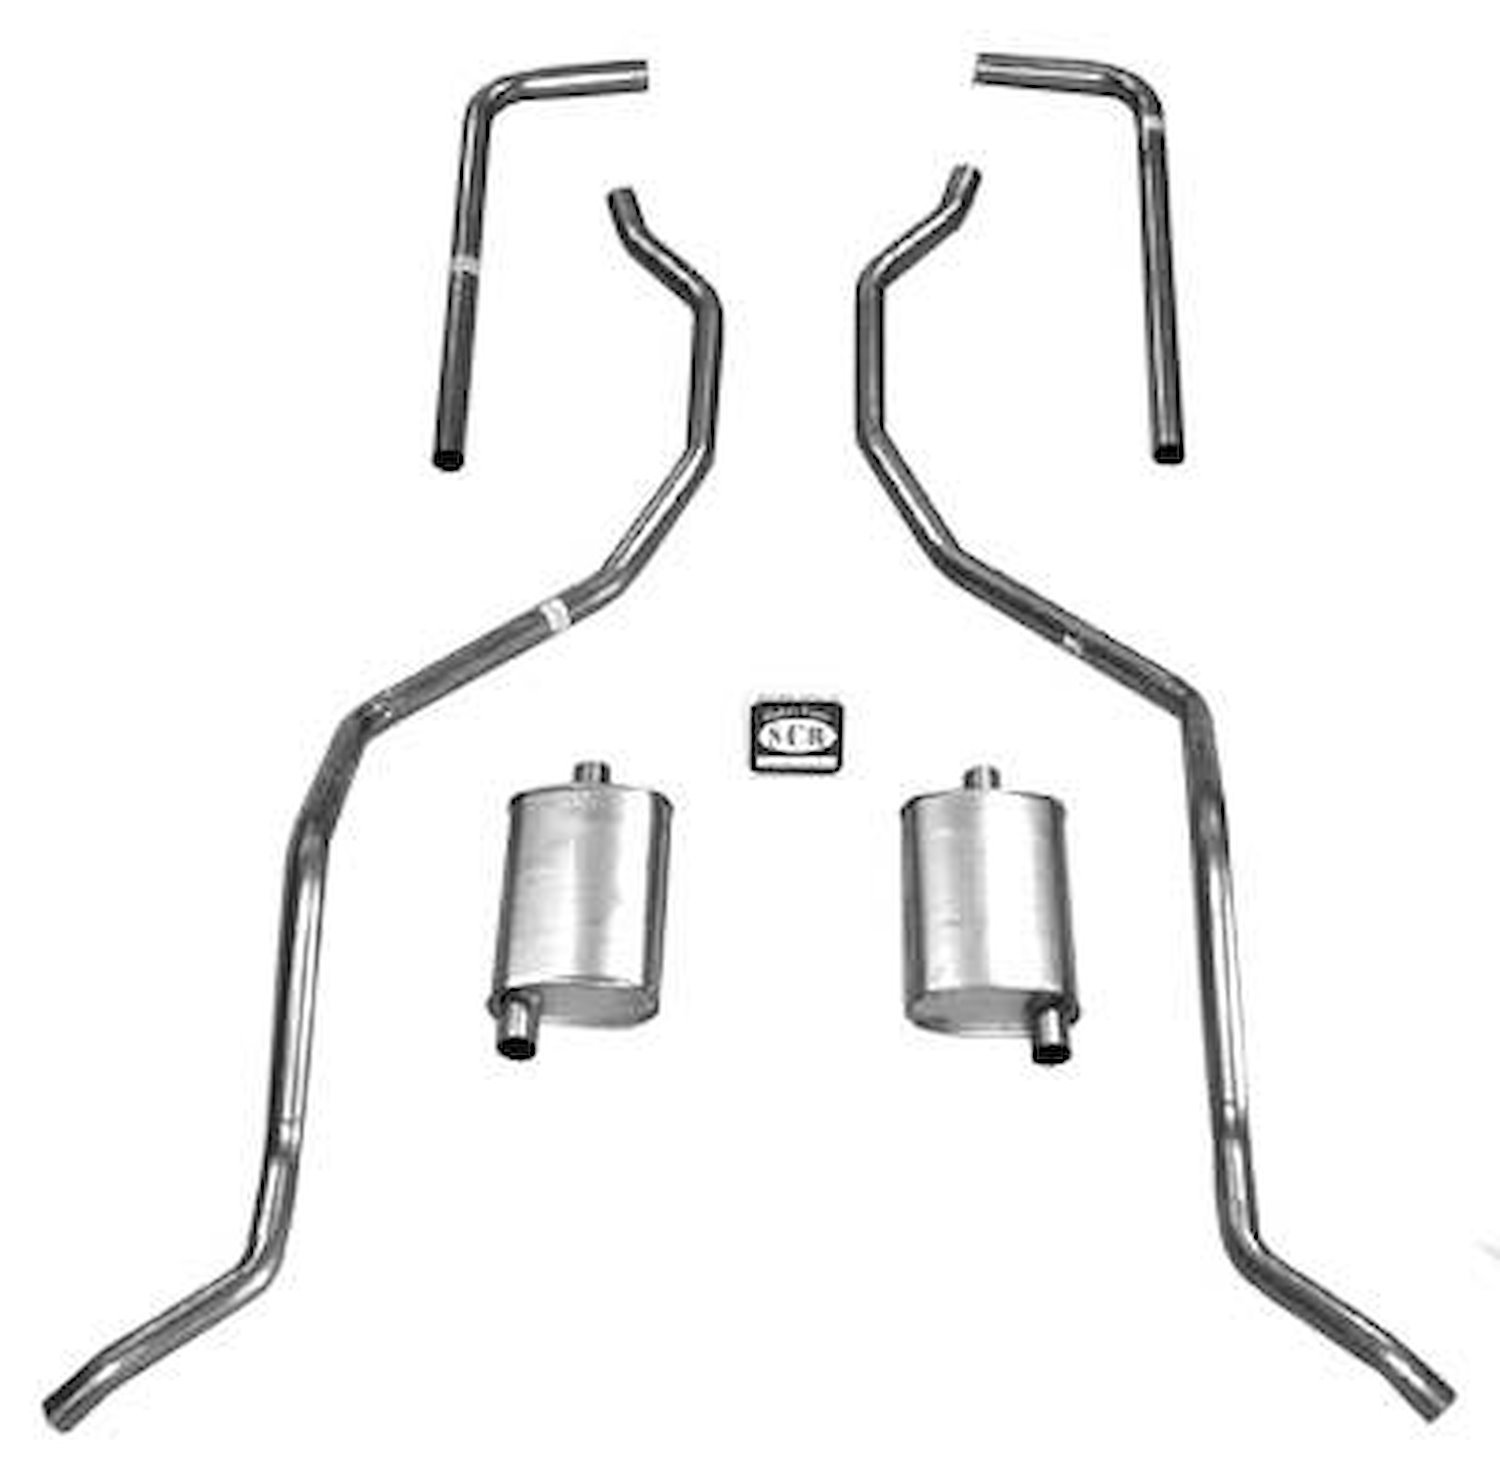 73043 1960-1964 Chevrolet Full-Size Exhaust System